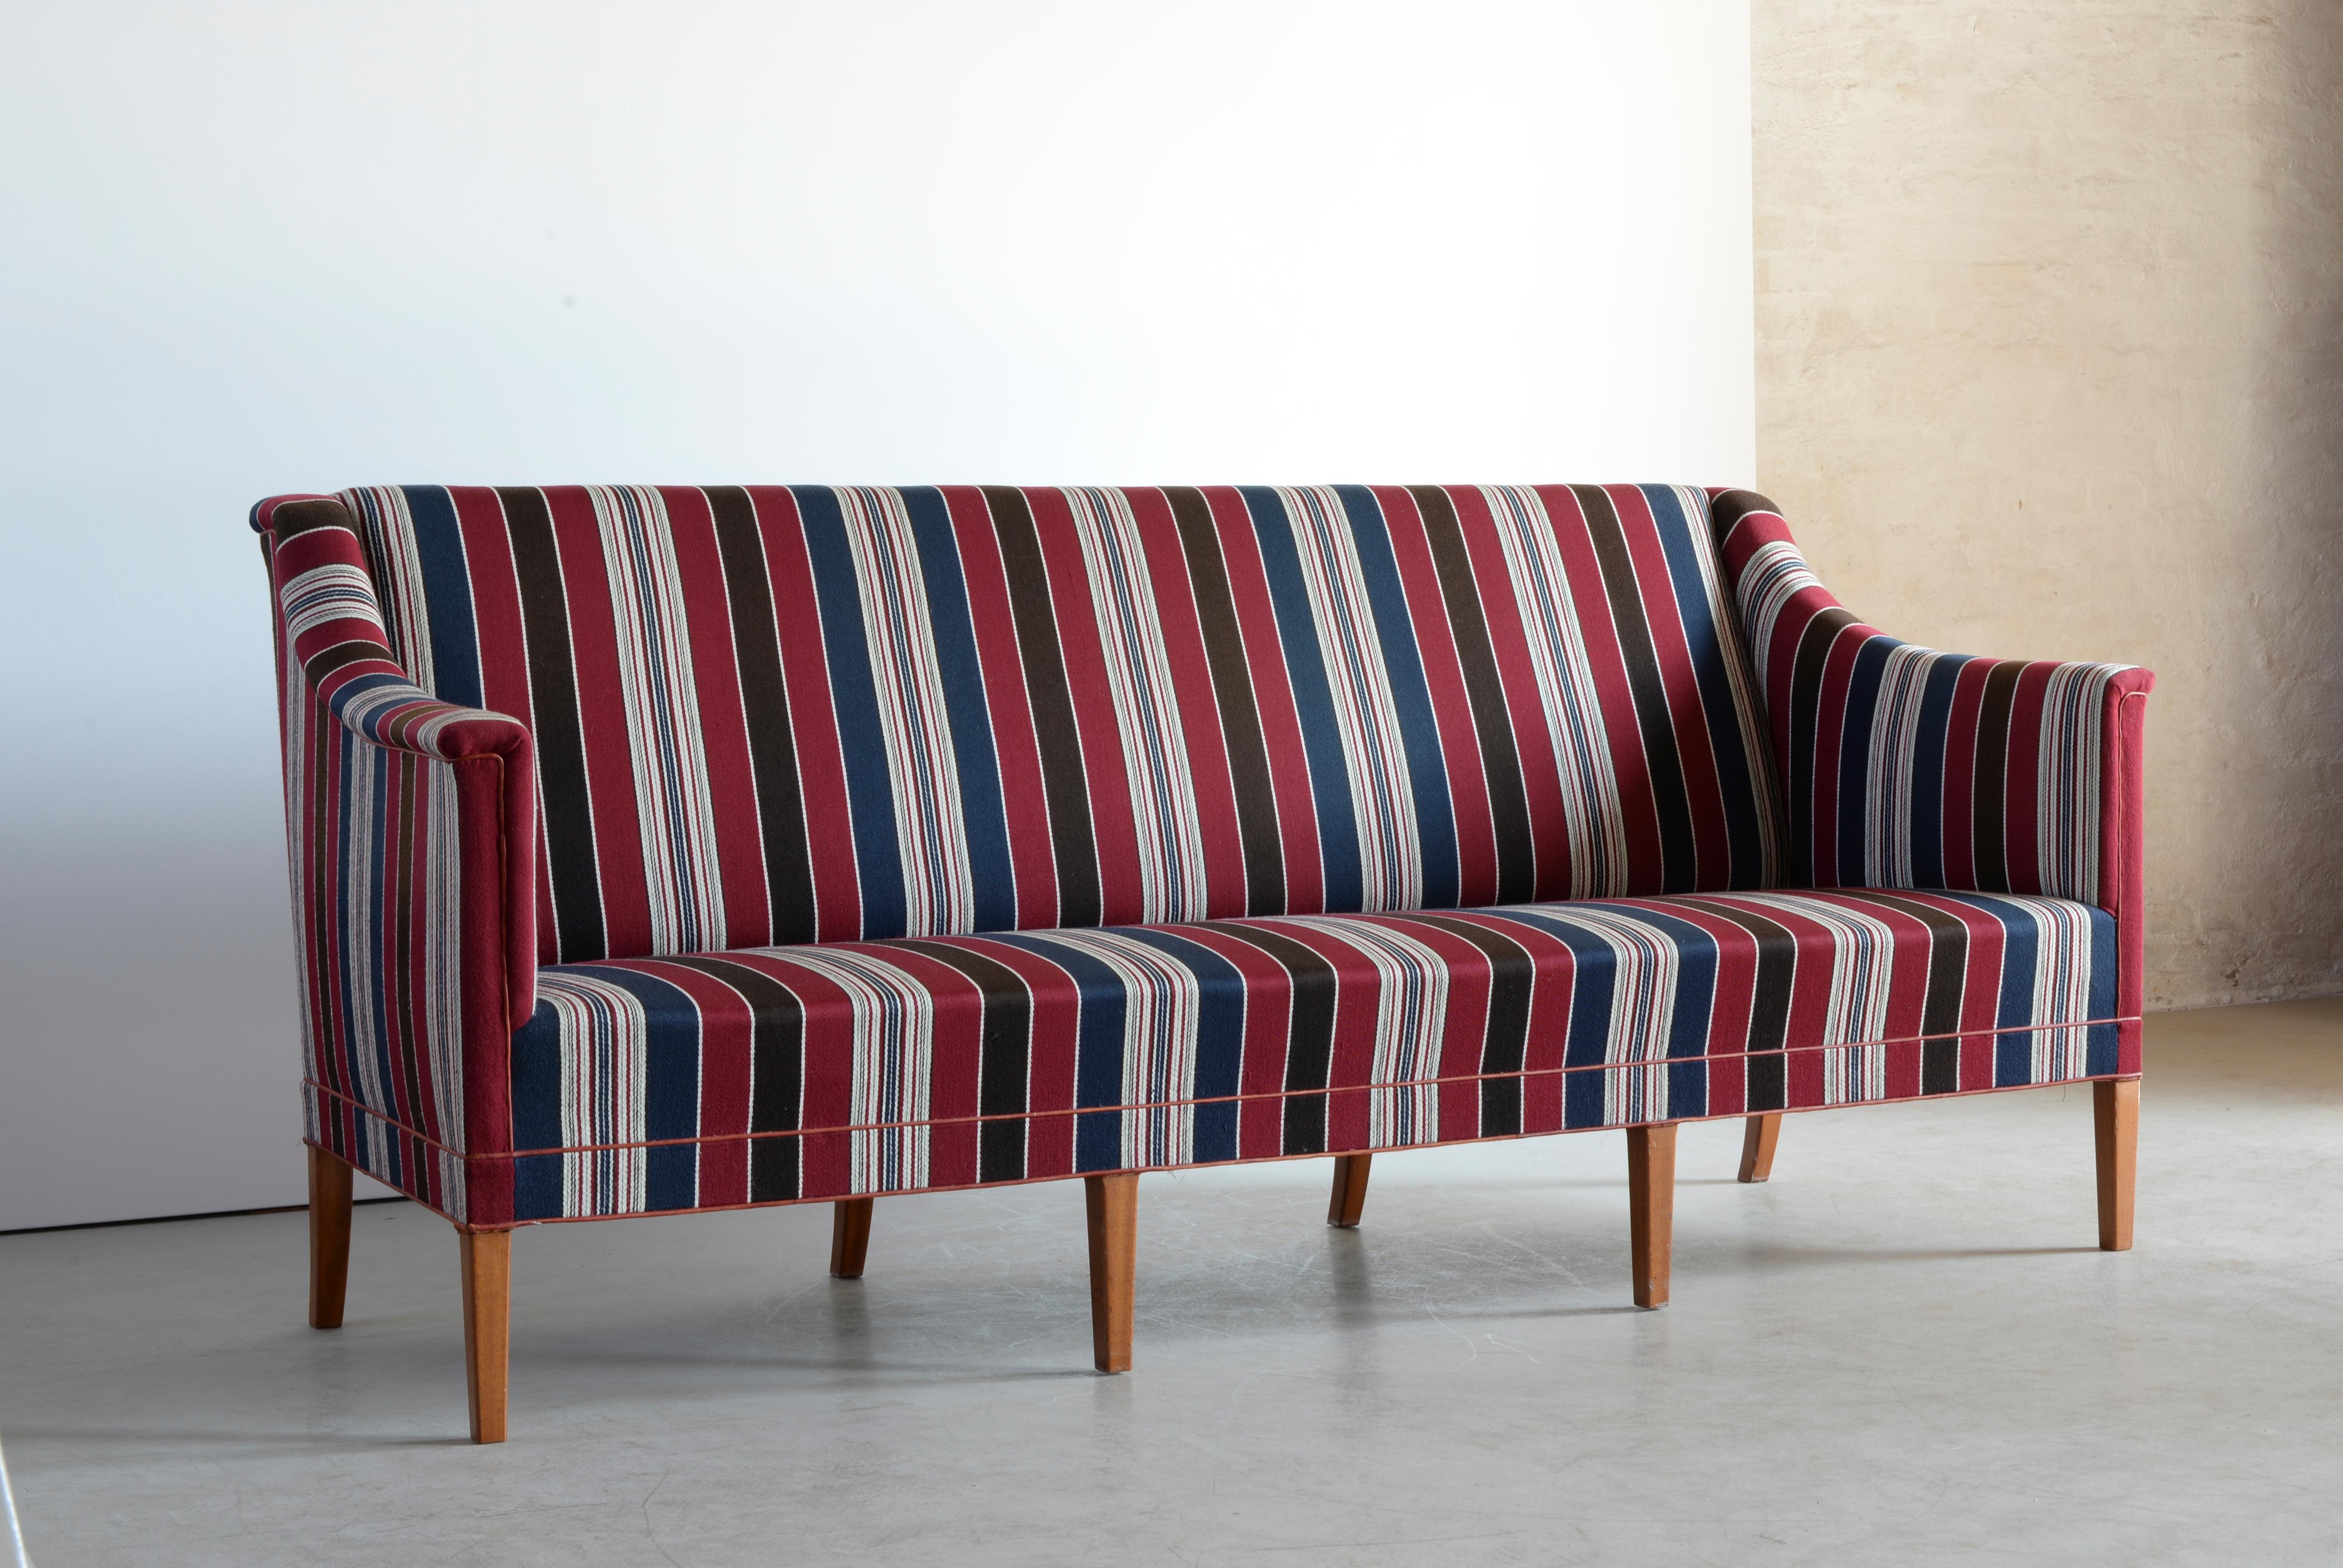 Kaare Klint. A three-seat sofa with mahogany legs, seat, sides and back with blue-, red- and whitestriped Greek Savak. Executed by Rud. Rasmussen, Copenhagen.